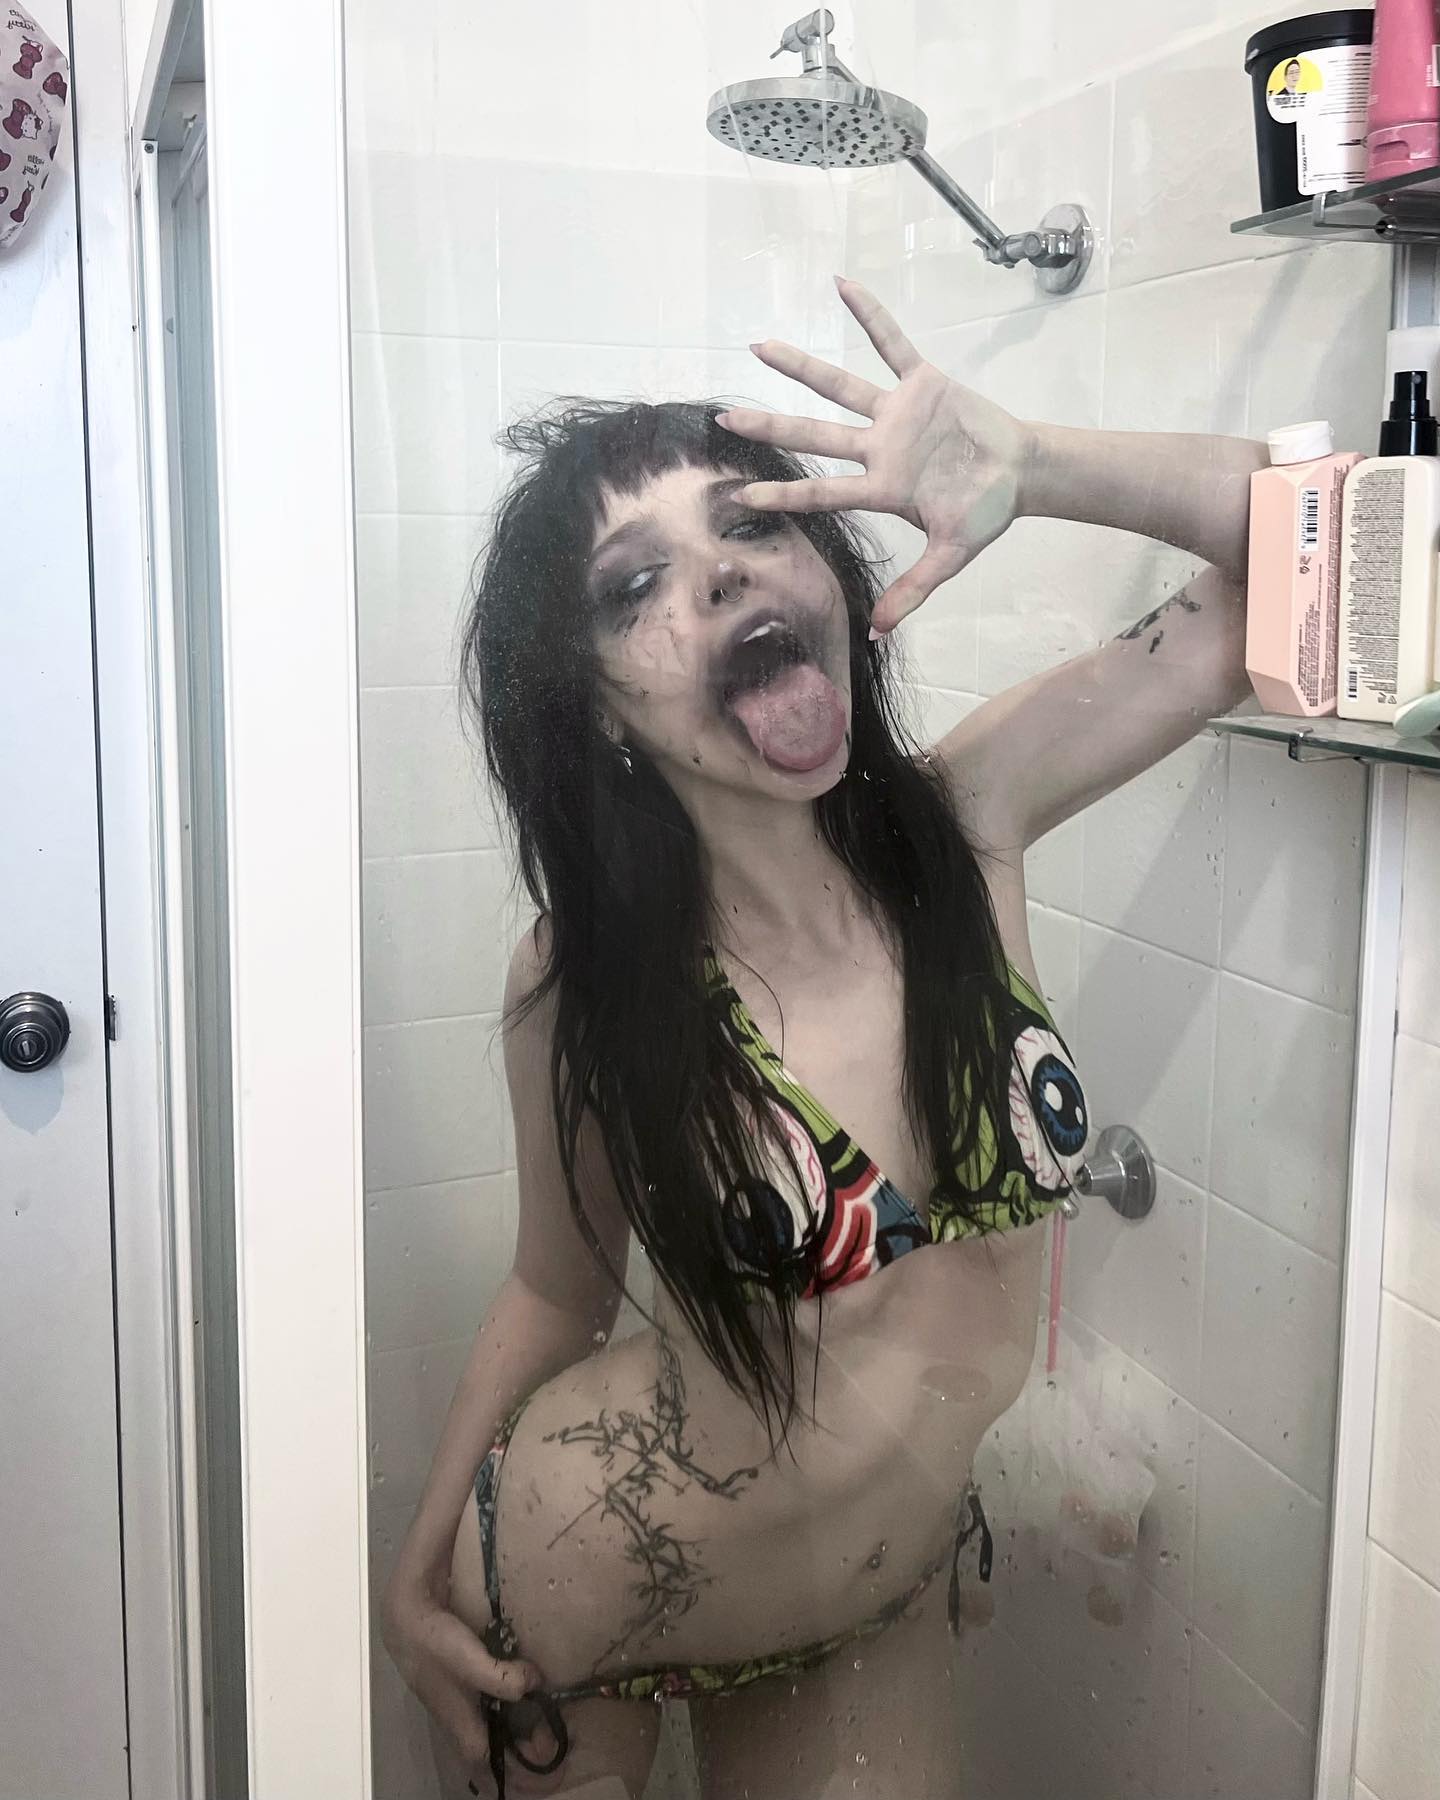 i need BRAAAAIN! 🧠 🧟‍♀️ 
swipe 2 the end for a surprise :3

★
★
★
#explore#explorepage#inspo#ootd#outfit#tiktok#y2k#fashion#grunge#photography#cute#model#altgirl#alt#alternative#2000s#cybercore#bikini#tattoo#goth#emo#gothgirl#emogirl#vampire#lingerie#cosplay#cosplaygirl#anime#zombie#halloween